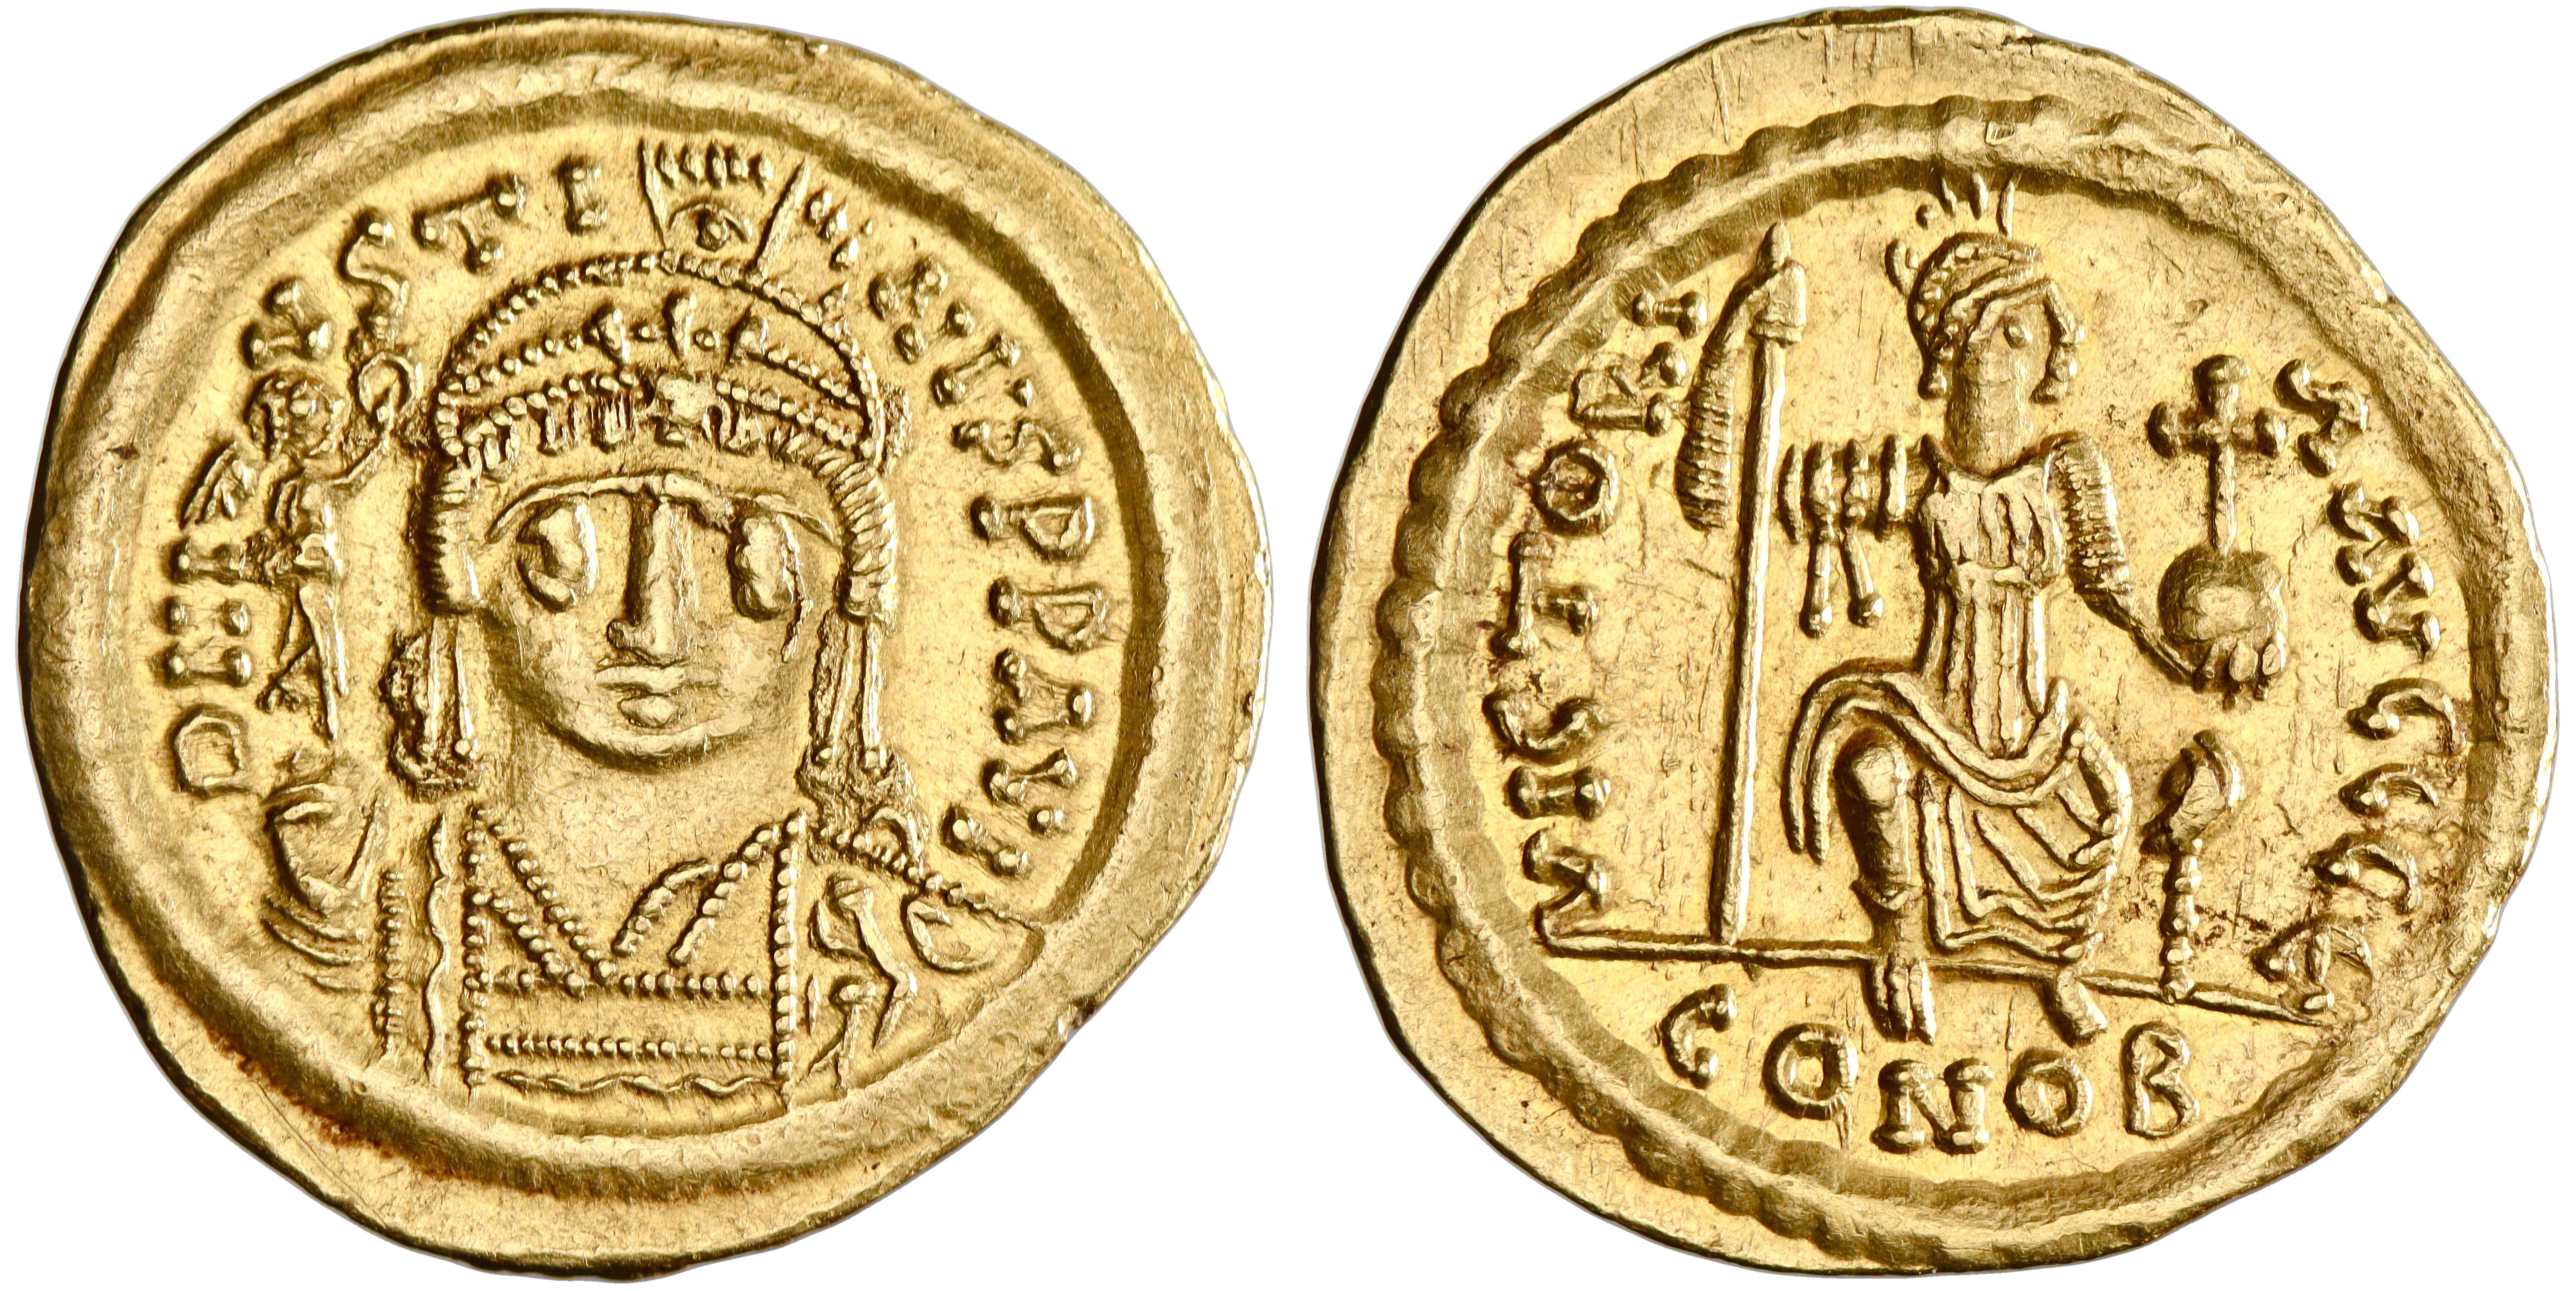 Byzantine, Justin II, gold solidus, Constantinople, 567-578 CE,  Constantinopolis seated